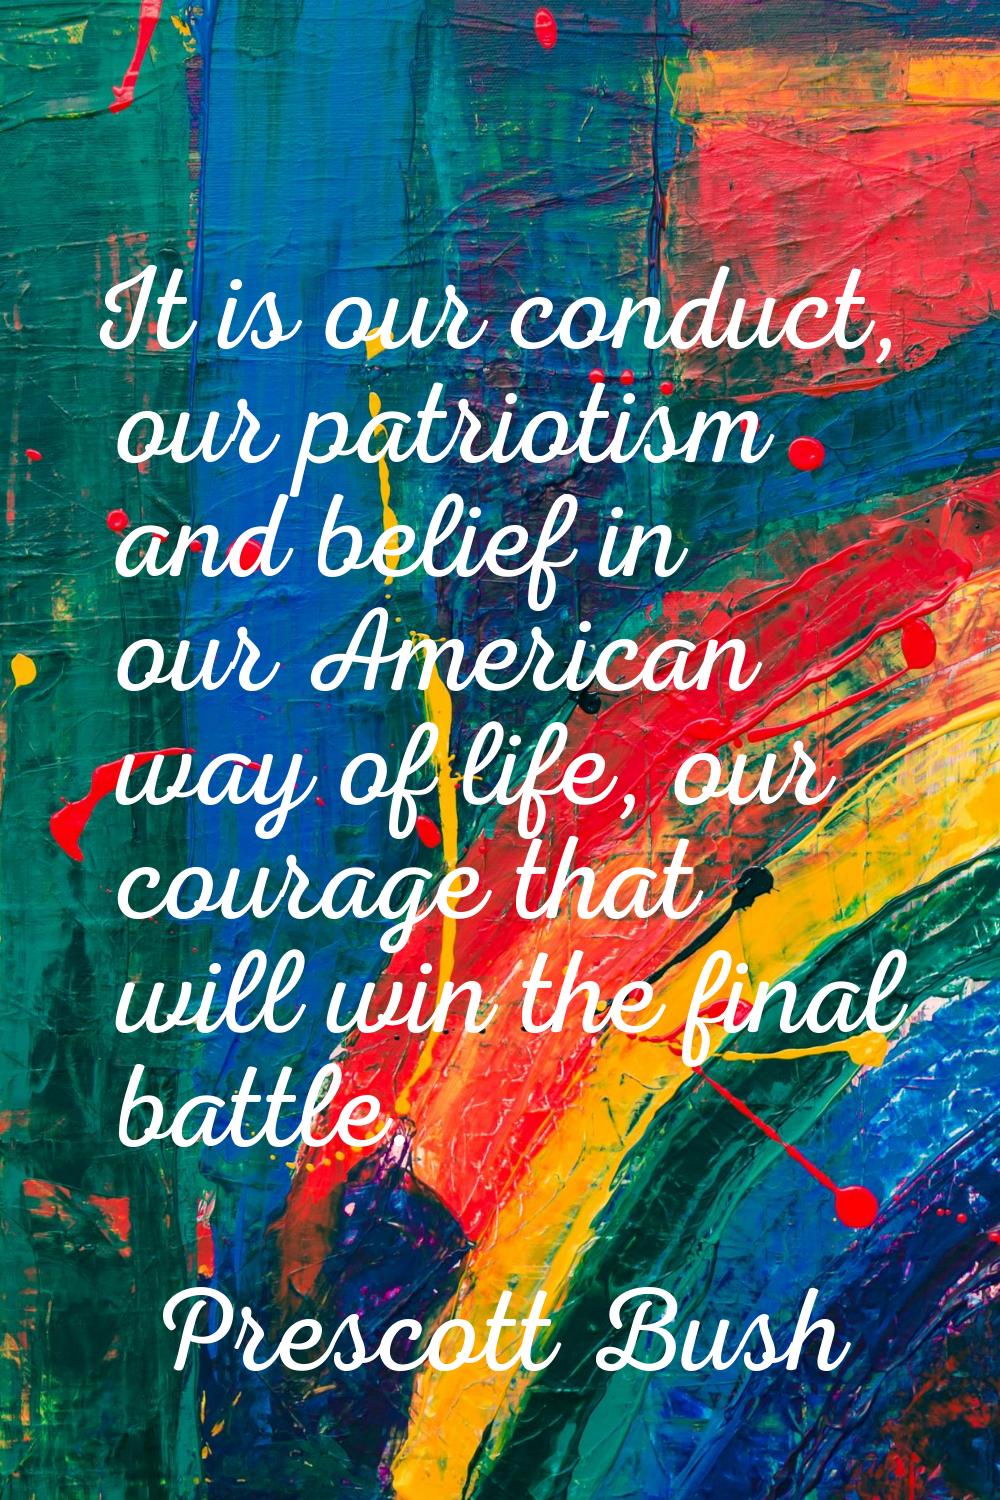 It is our conduct, our patriotism and belief in our American way of life, our courage that will win